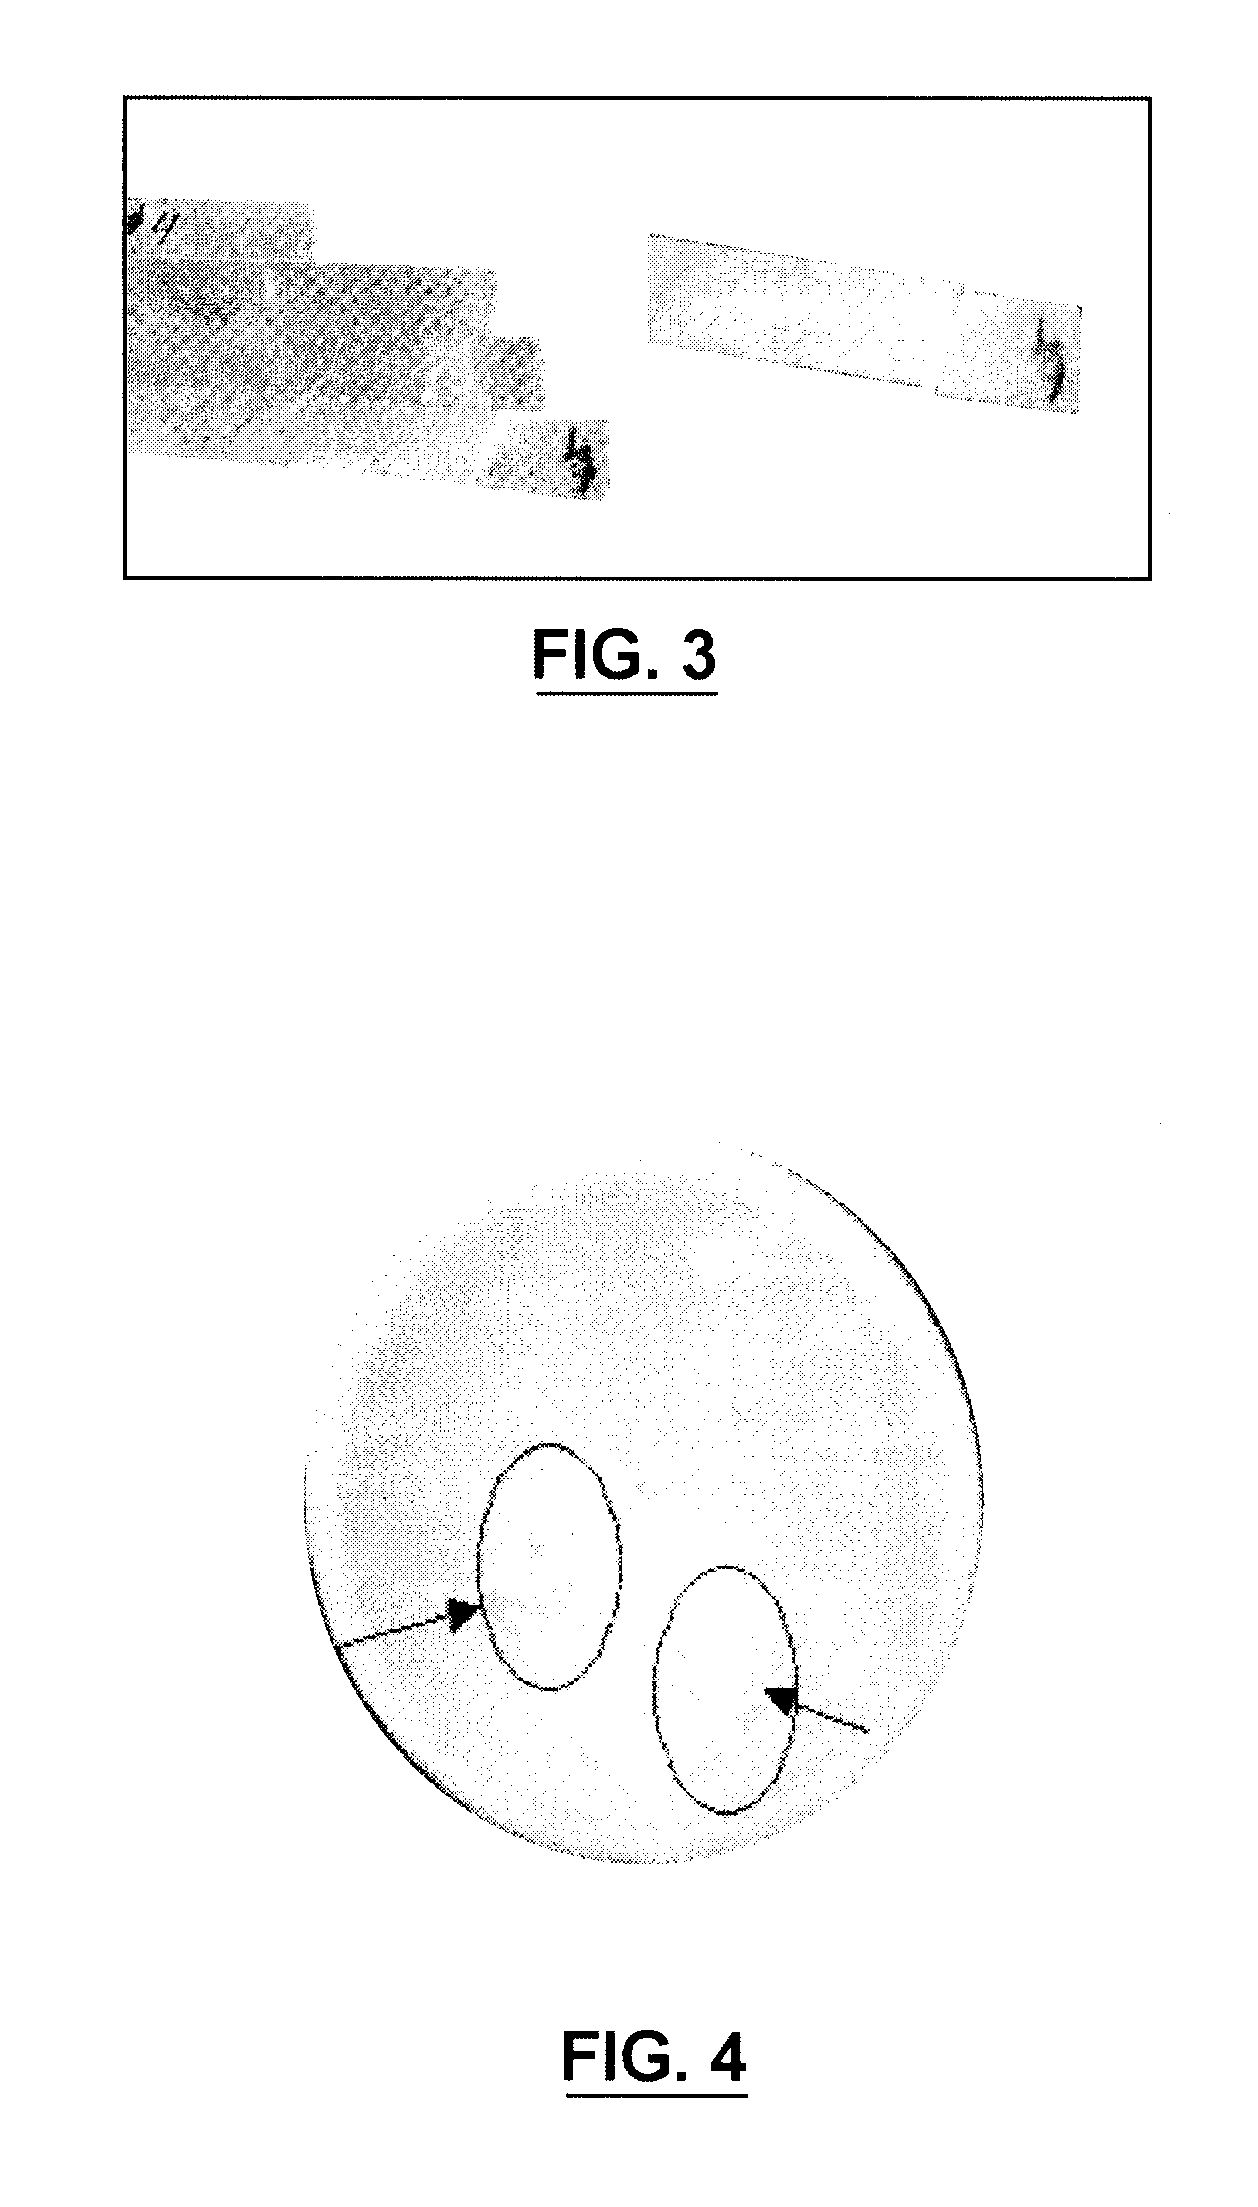 Manufacturing process for hybrid organic and inorganic fibre-filled composite materials